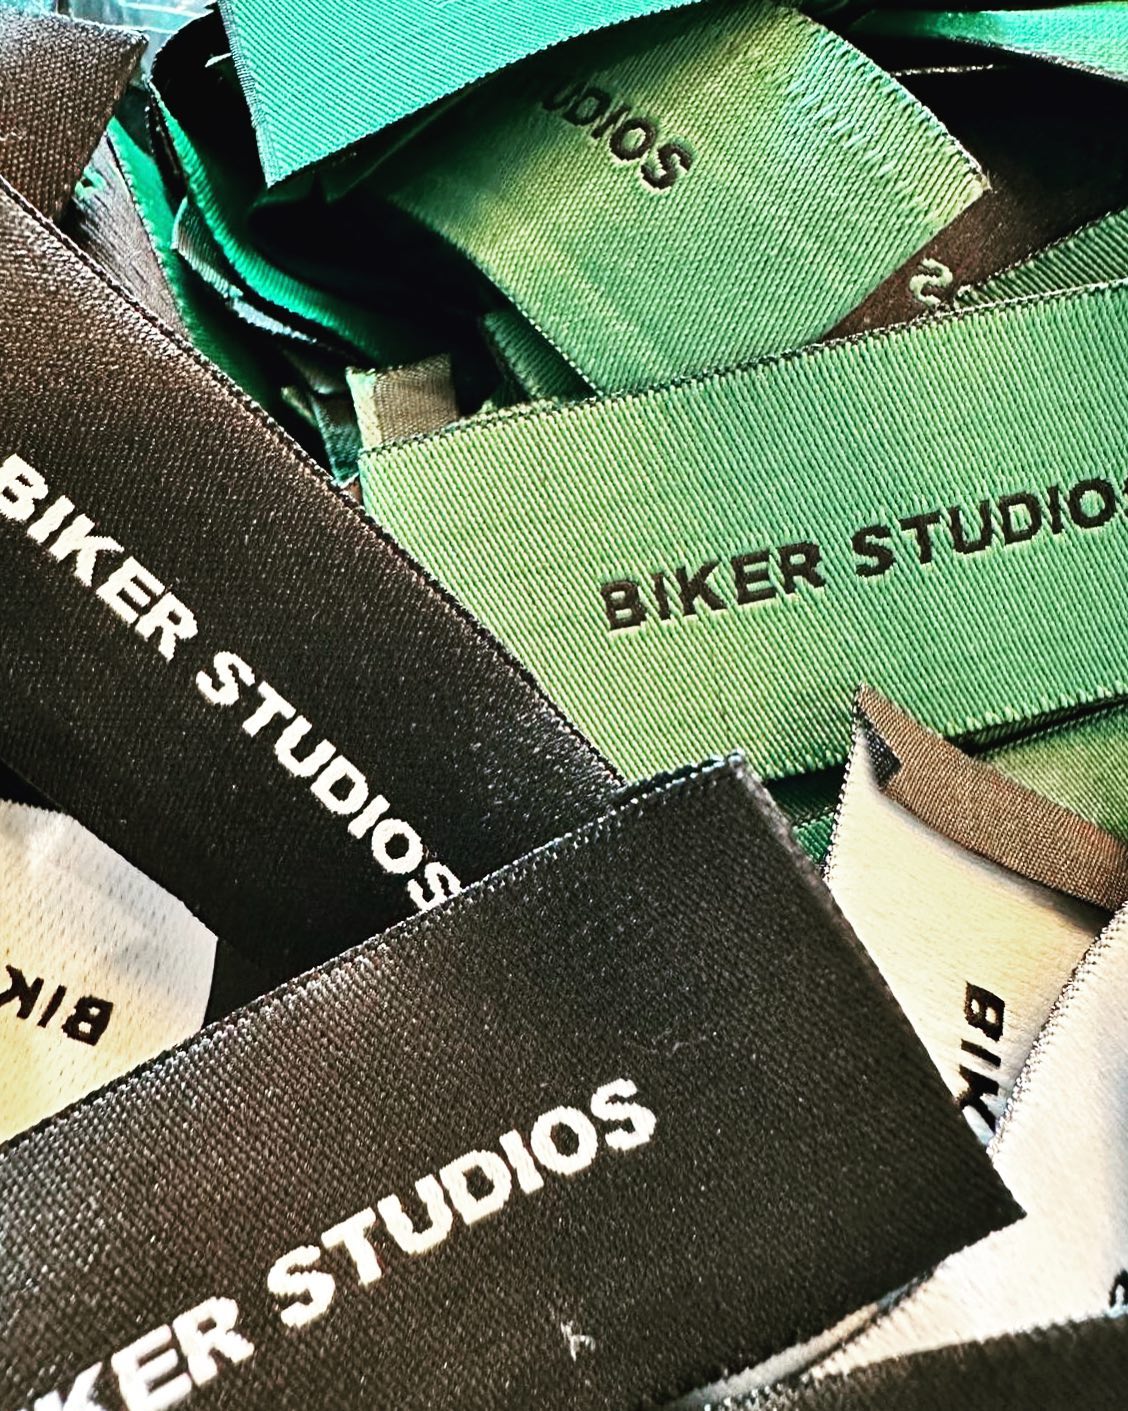 Being a partner in the excitement of opening new brands and accompanying your brand's growth is the best part of the job for us. #Businesspartner #labels #wovenlabel #etiquetatejida #etiqueta